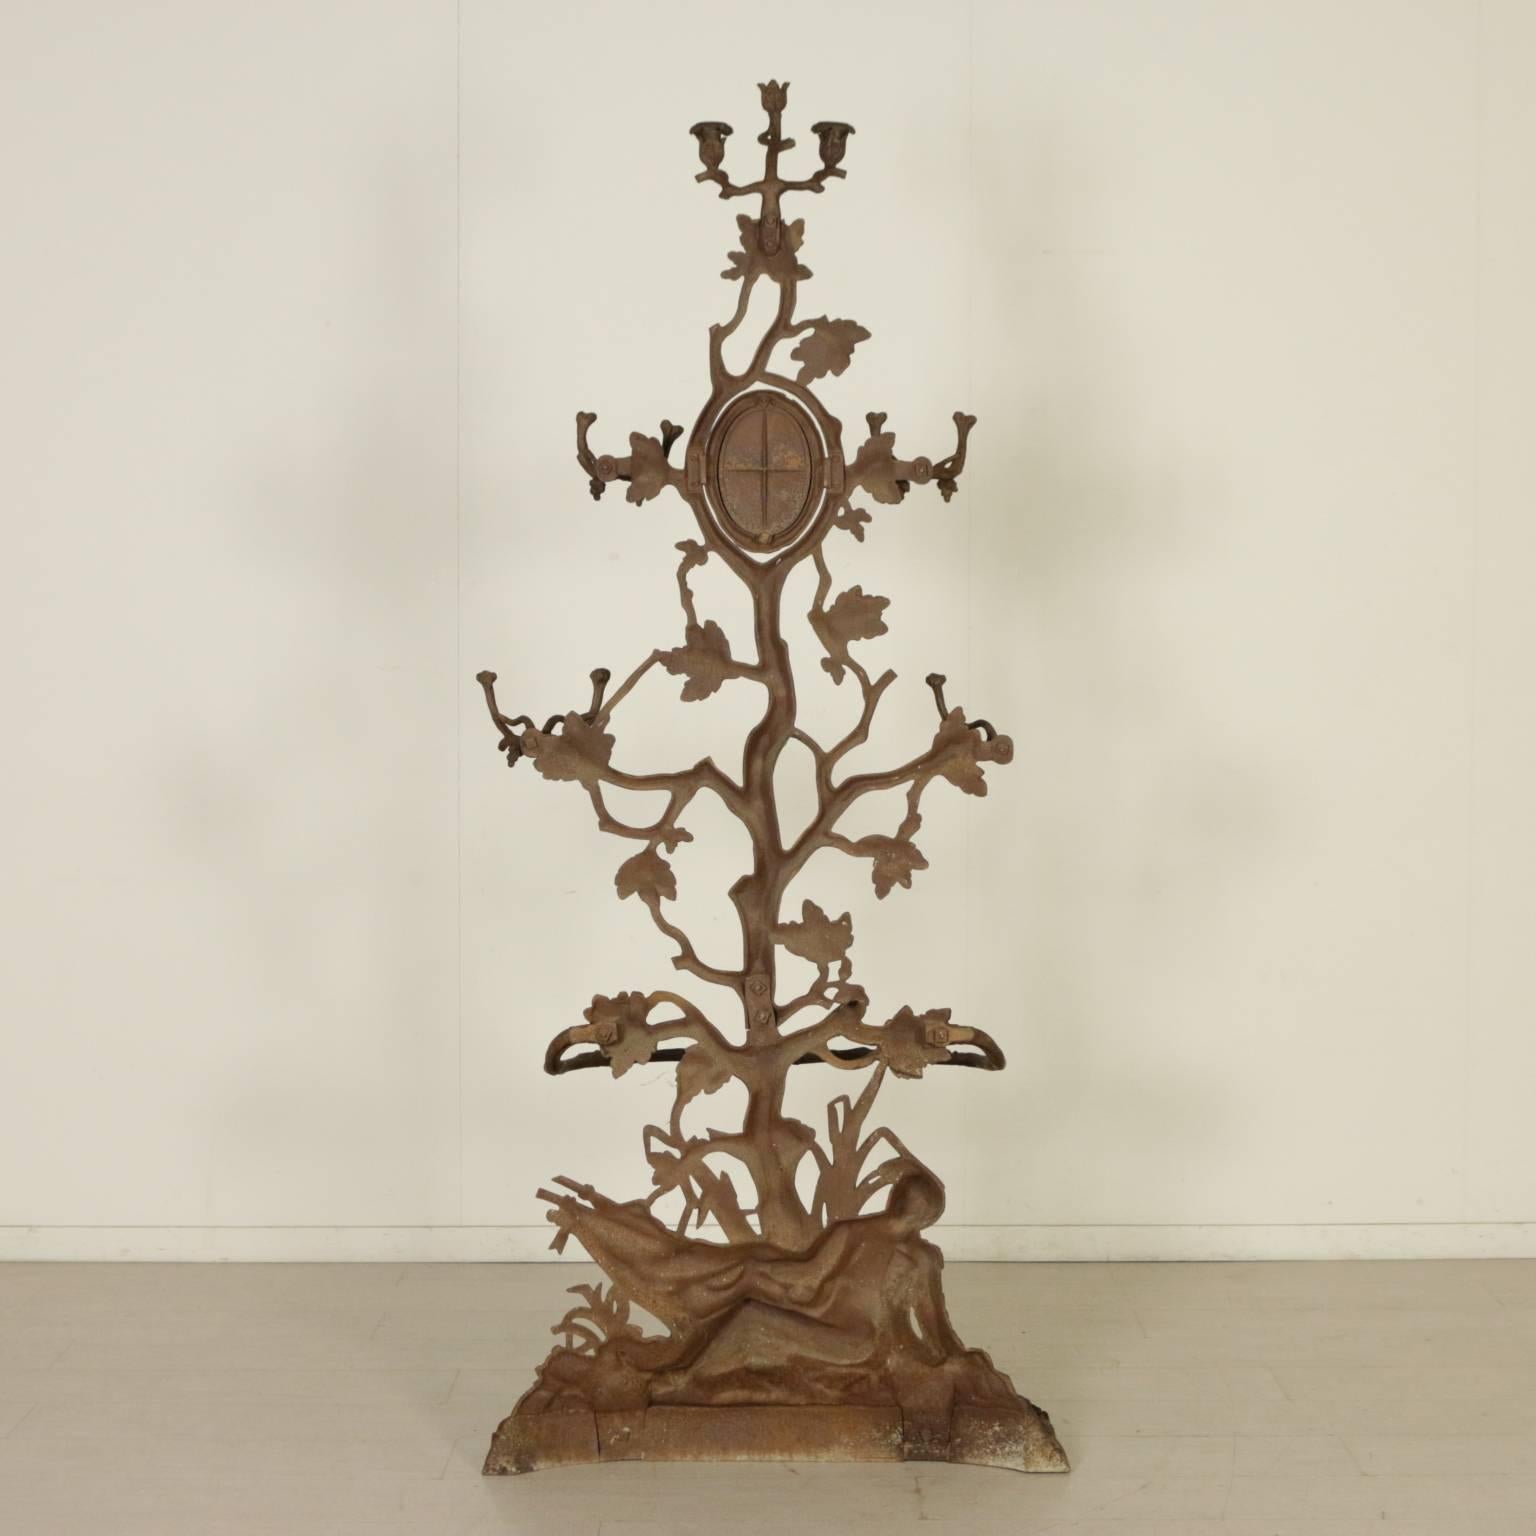 A cast iron coat hanger, oak tree shape with leaves, acorns and lying soldier. In the middle, a tilting oval mirror and candlesticks. Umbrella stand with enamelled tubs. Marked Corneau Freres A Carleville n° 287. Manufactured in France, late 19th